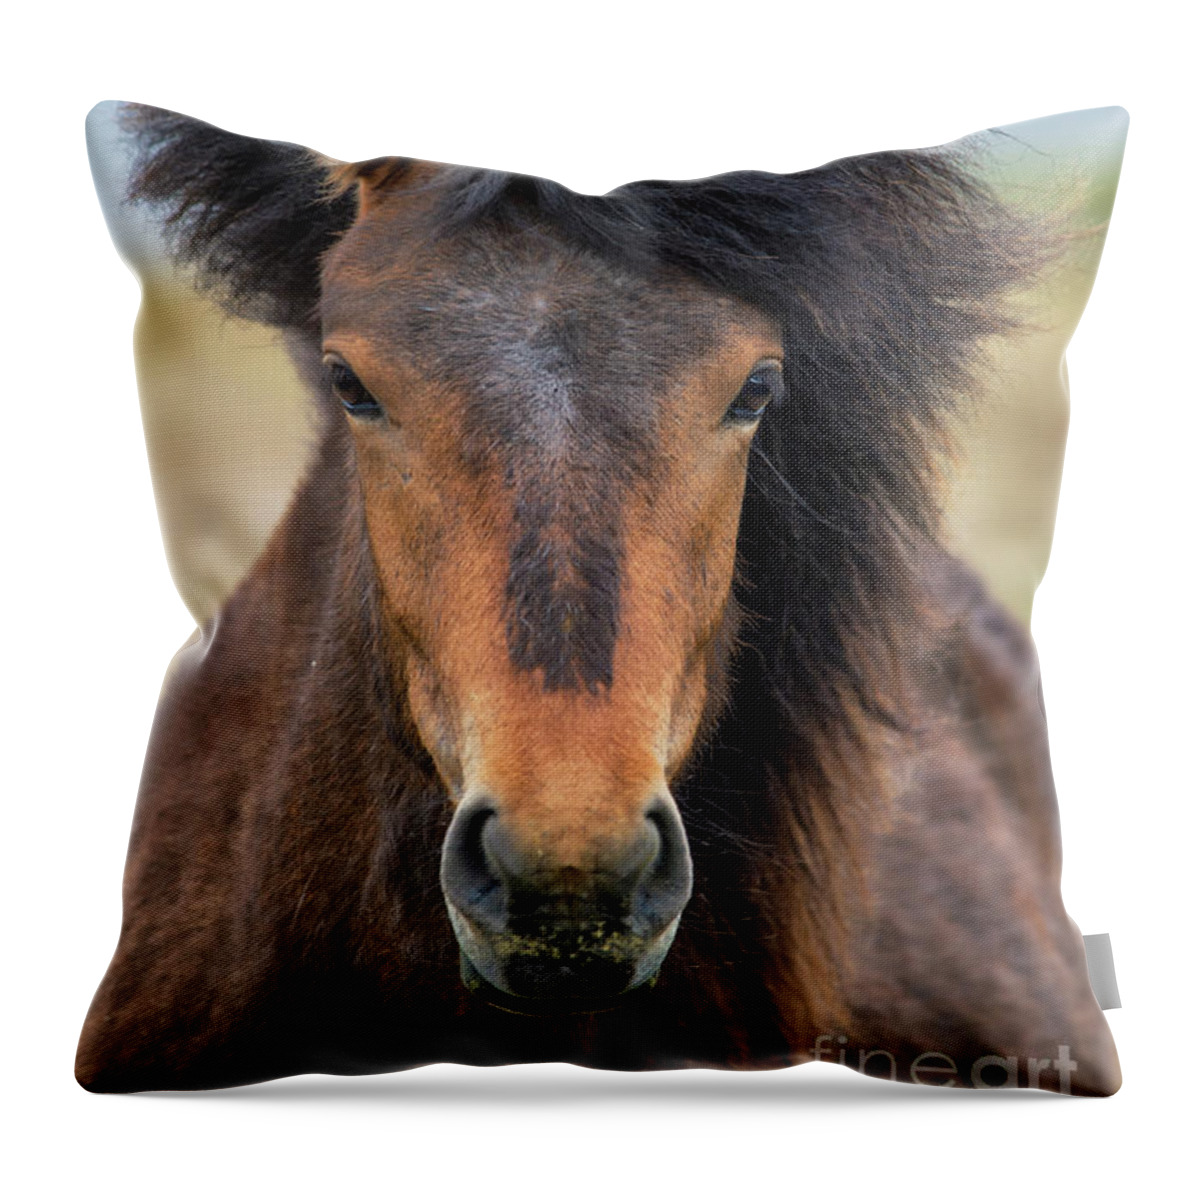 Festblues Throw Pillow featuring the photograph Icelandic Equine Beauty.. by Nina Stavlund